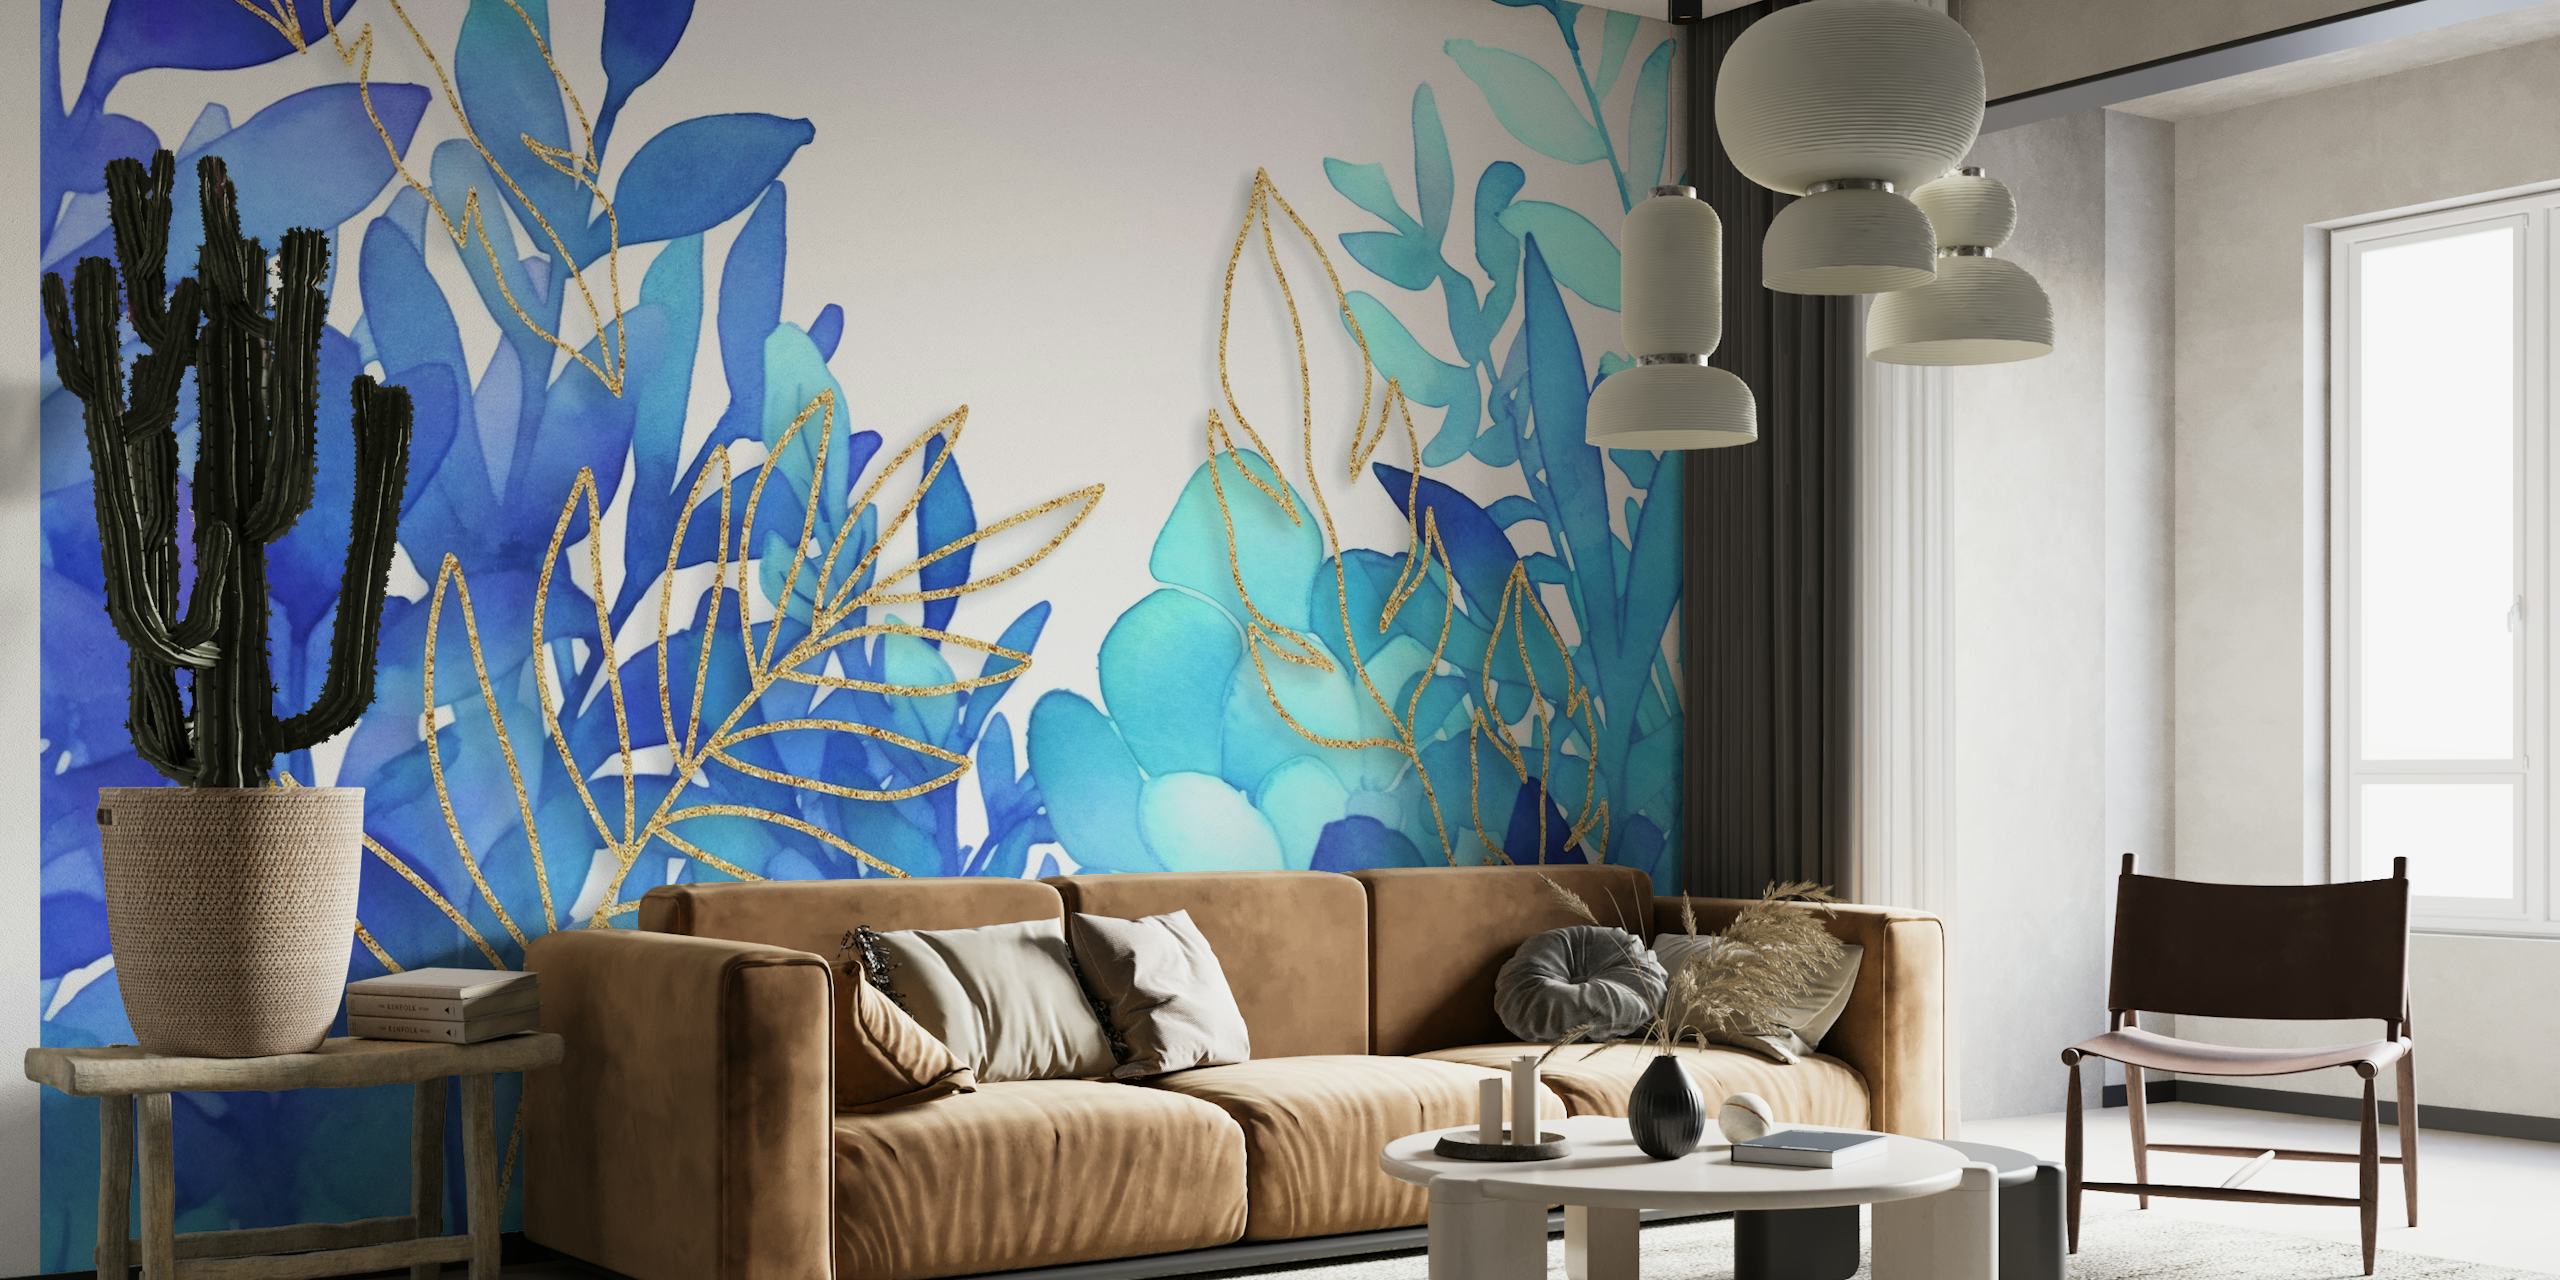 Turquoise Blue Foliage With Gold Lines behang